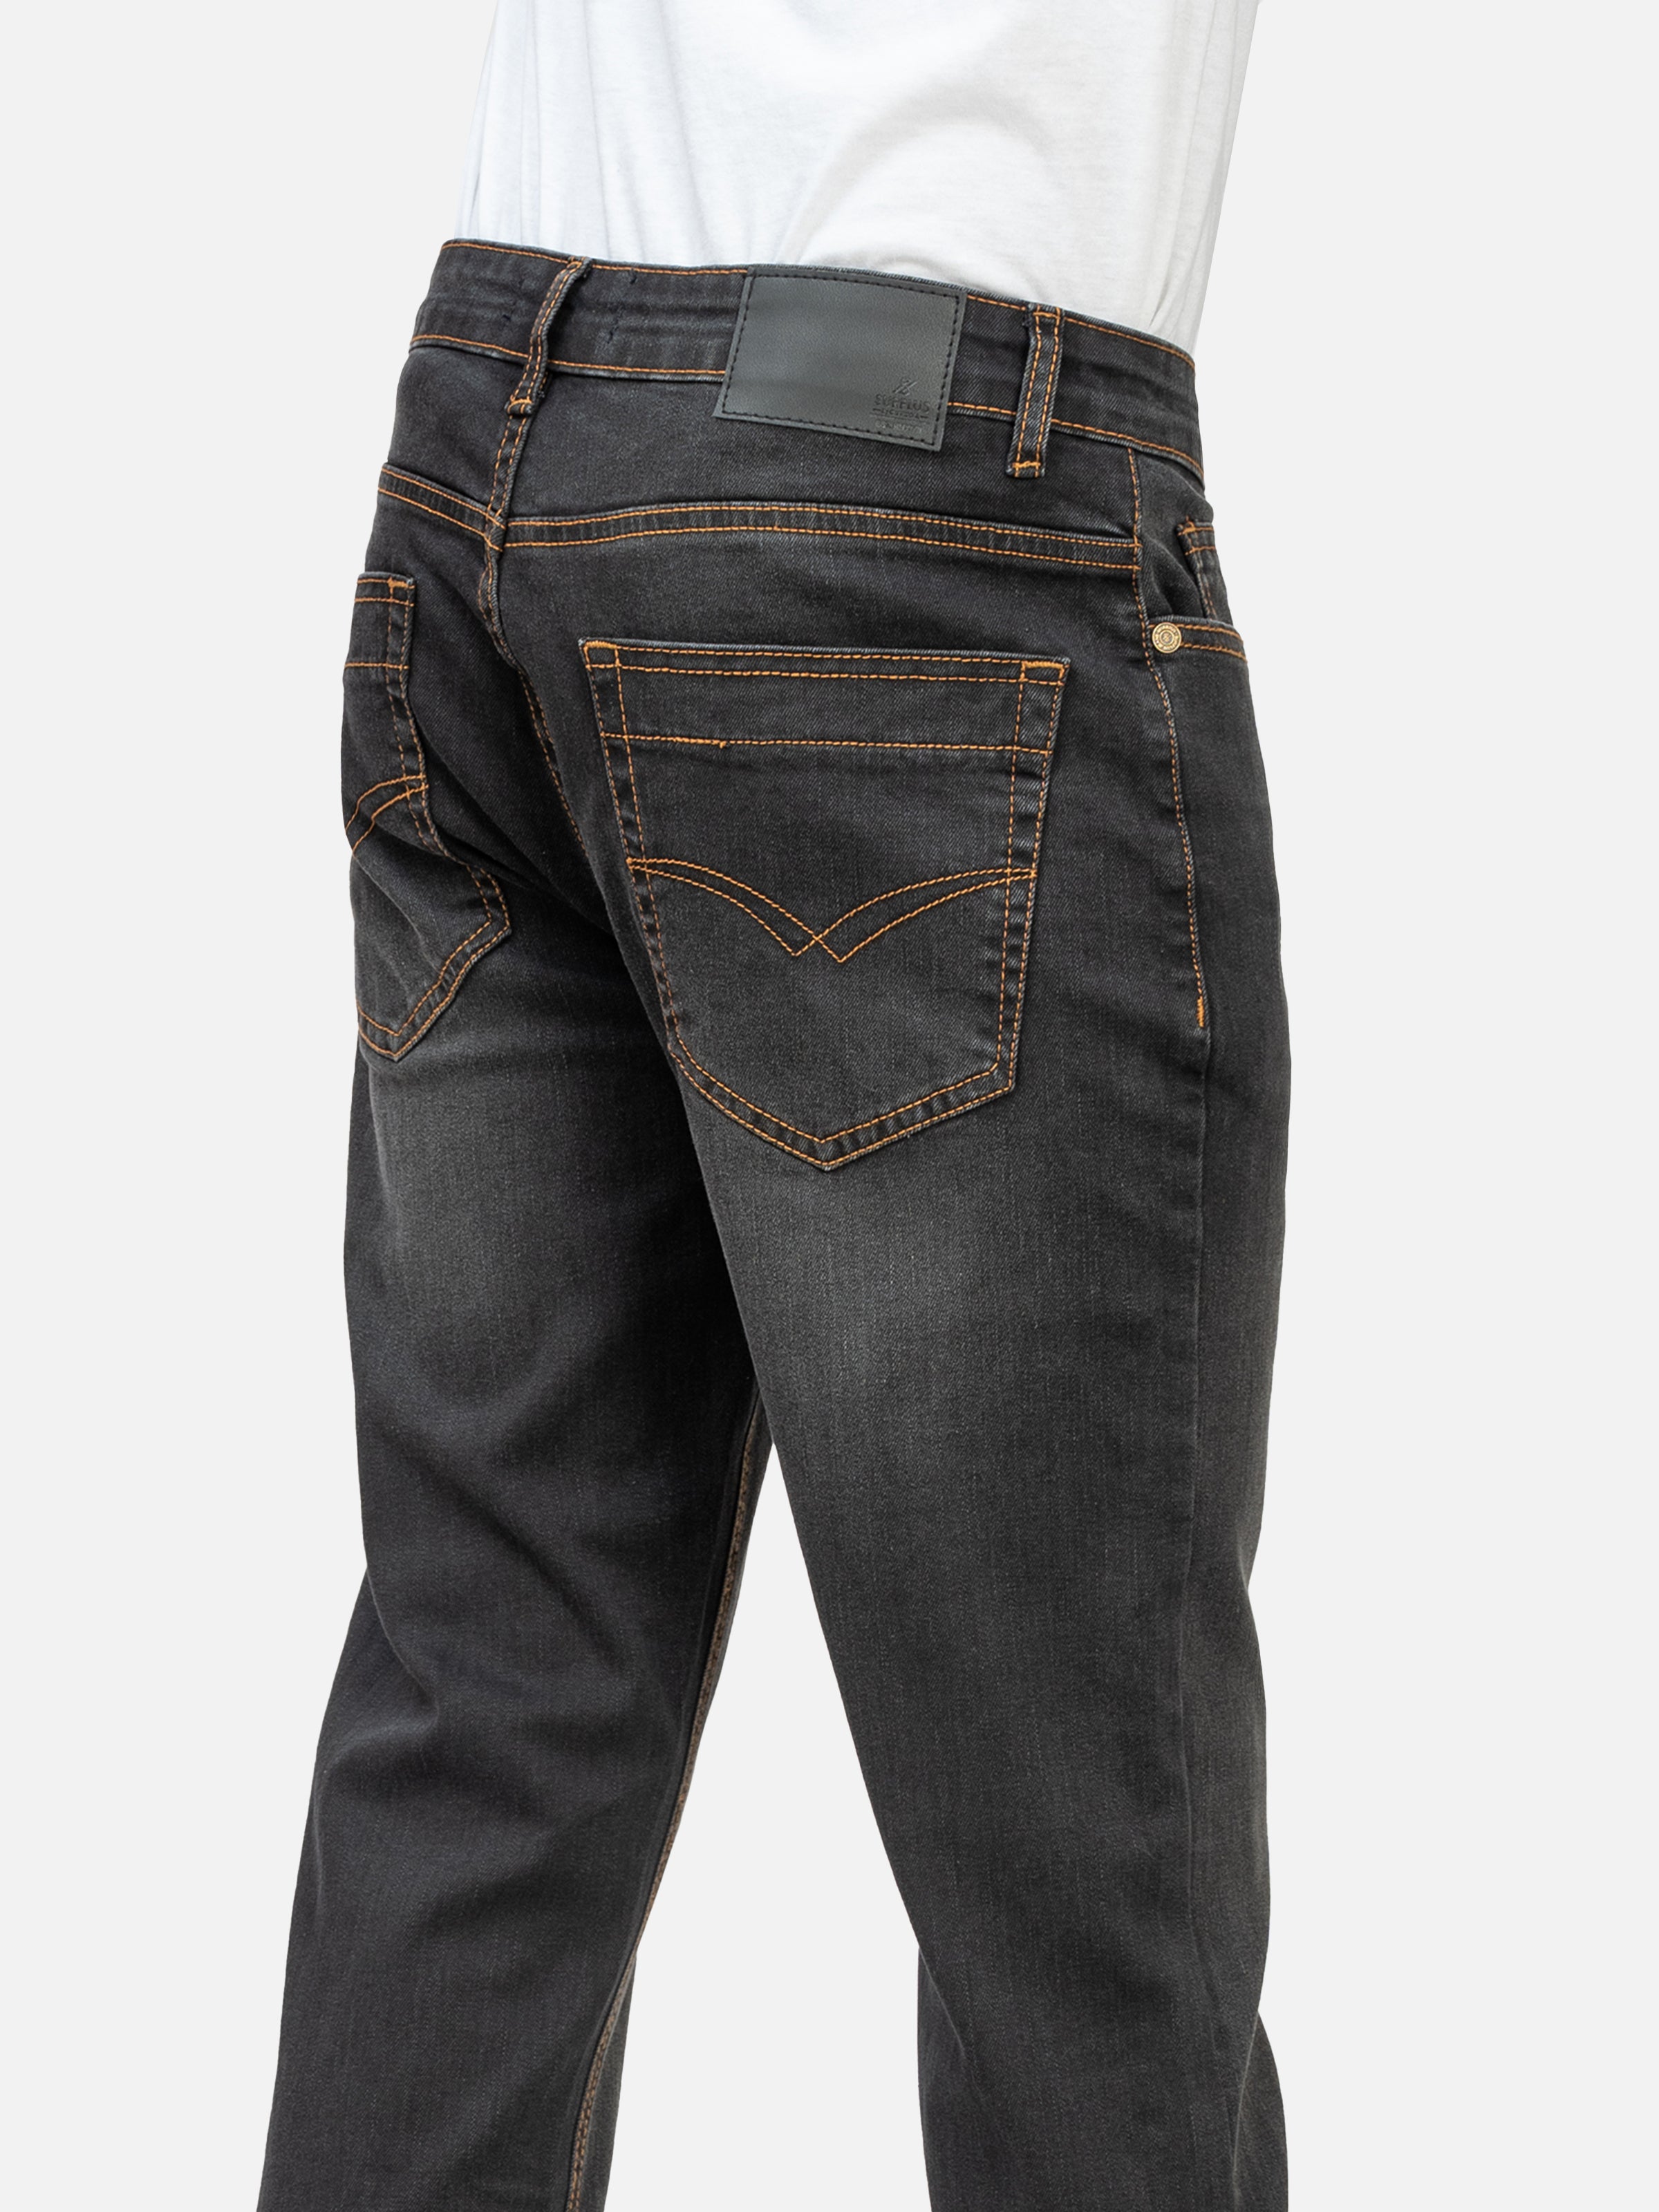 JEANS SLIM FIT CHARCOAL GREY